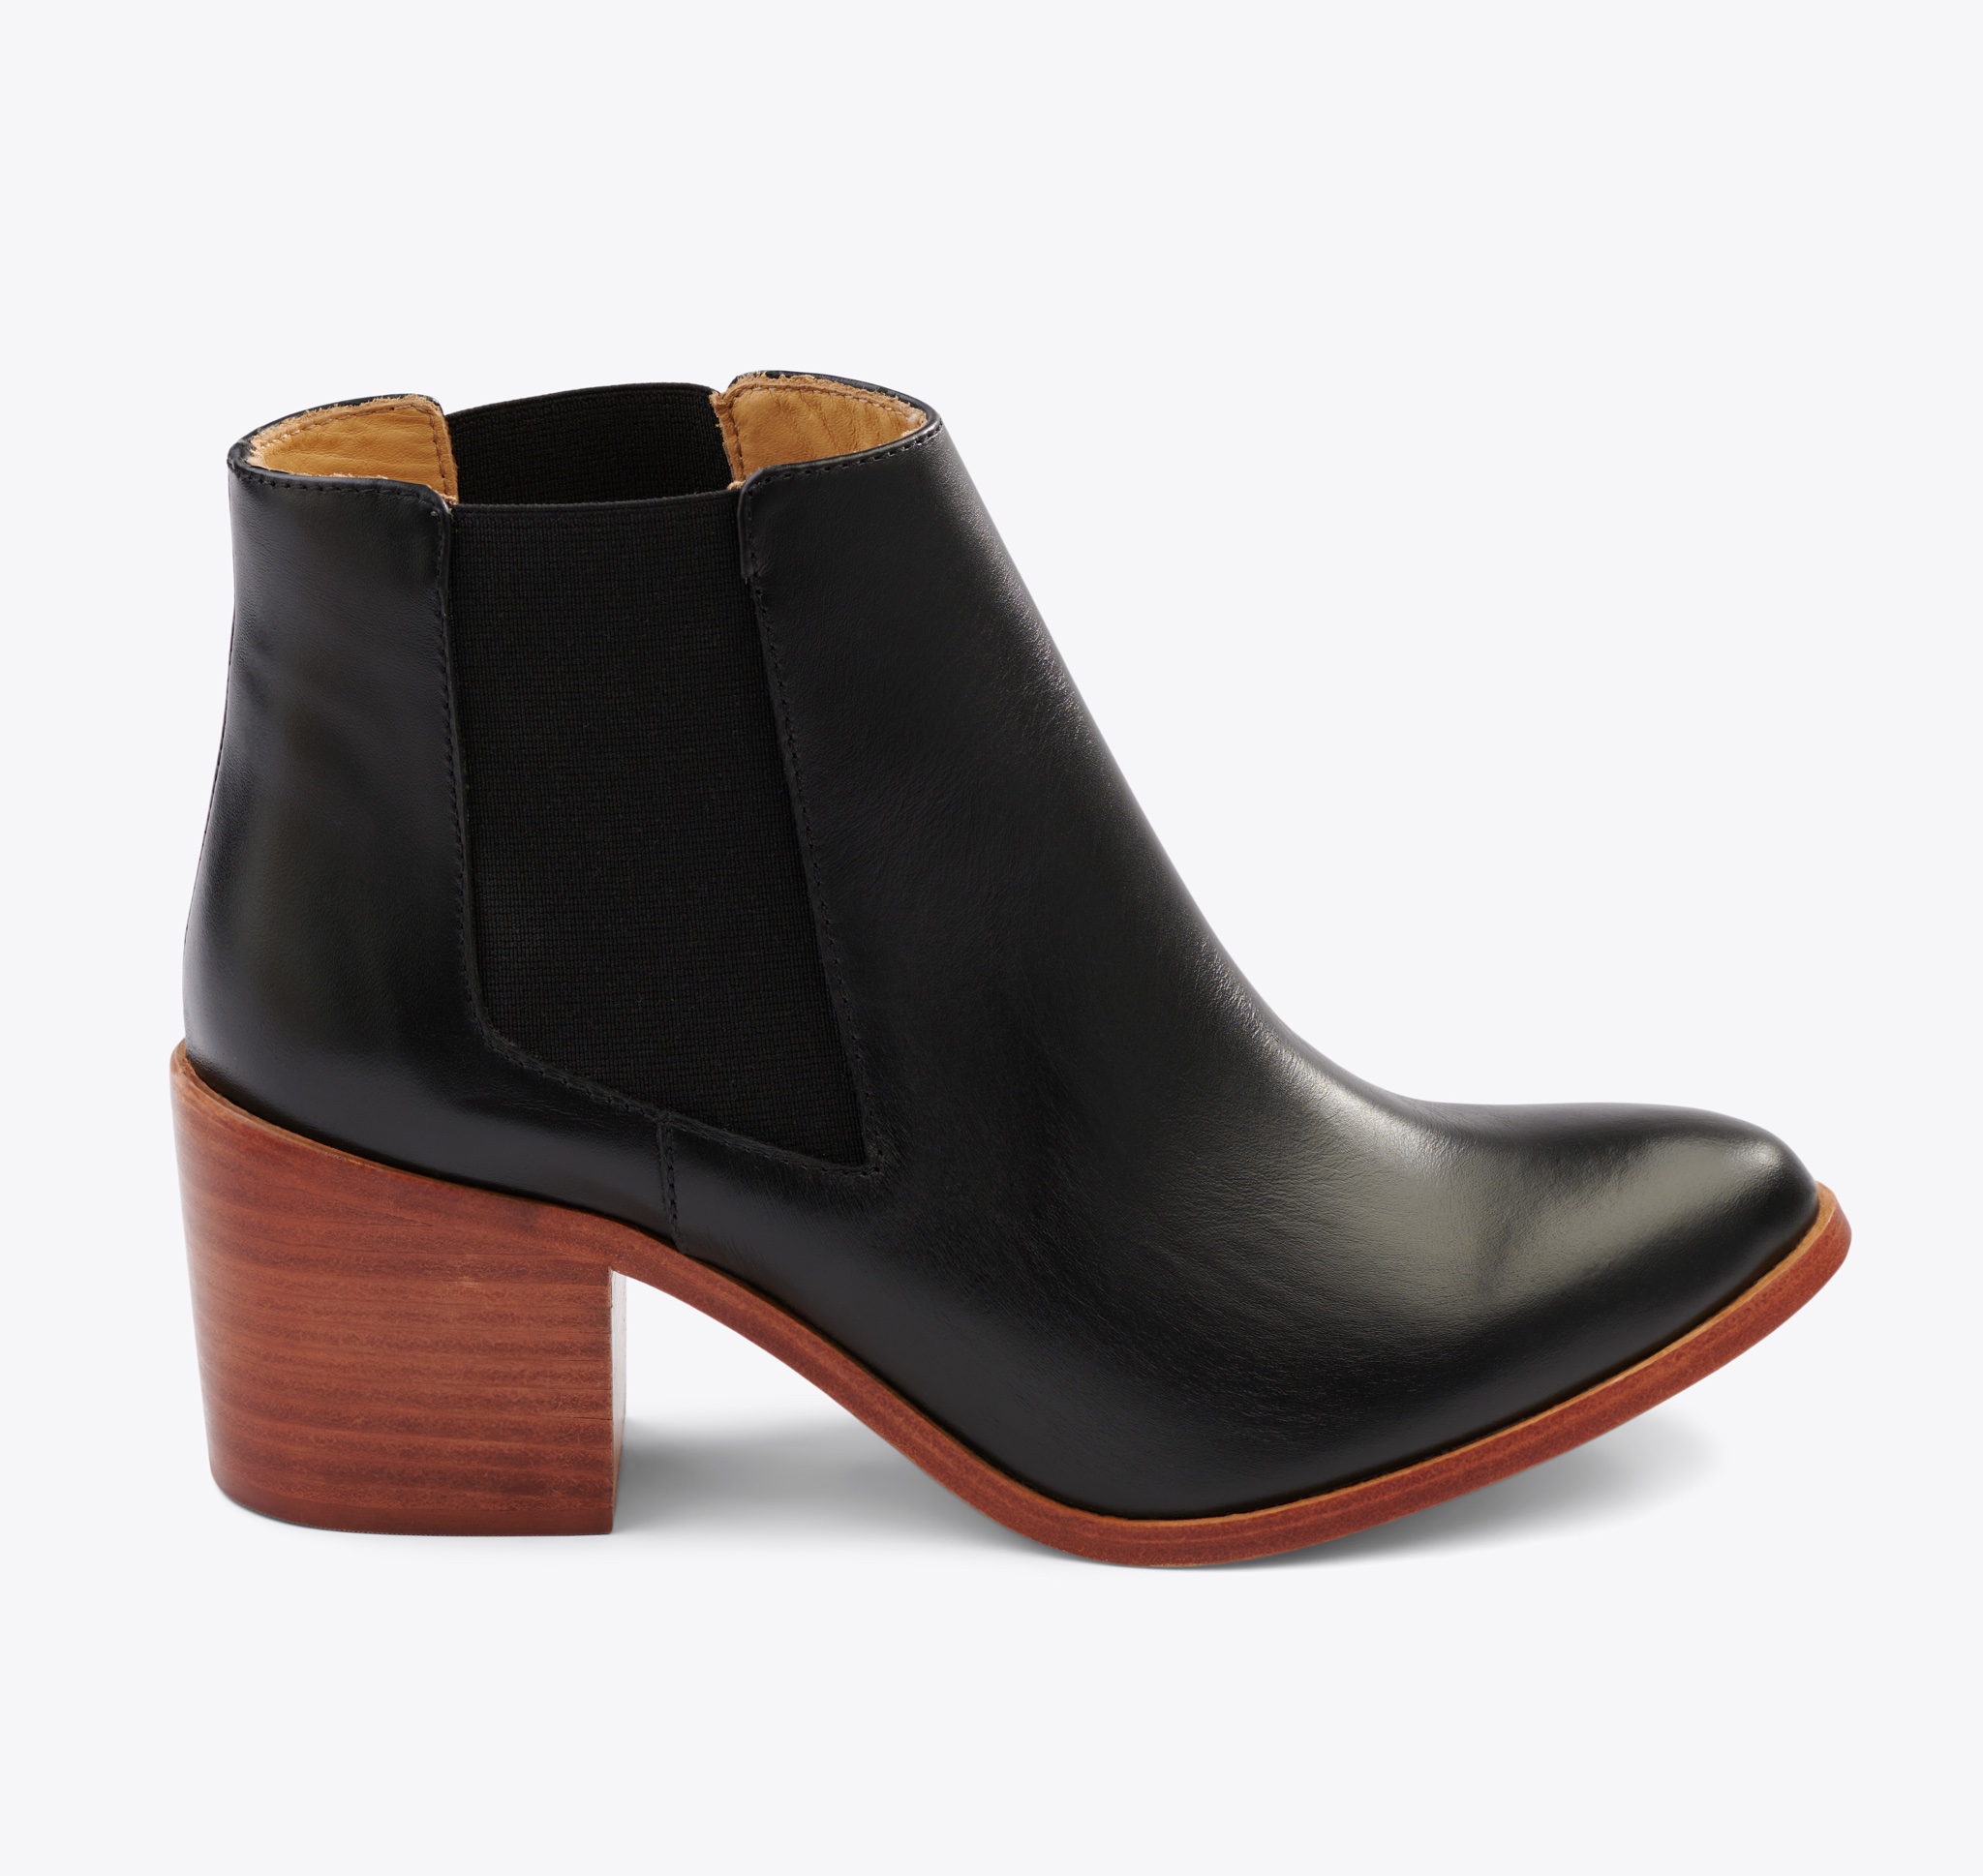 Nisolo Heeled Chelsea Boot Black - Every Nisolo product is built on the foundation of comfort, function, and design. 